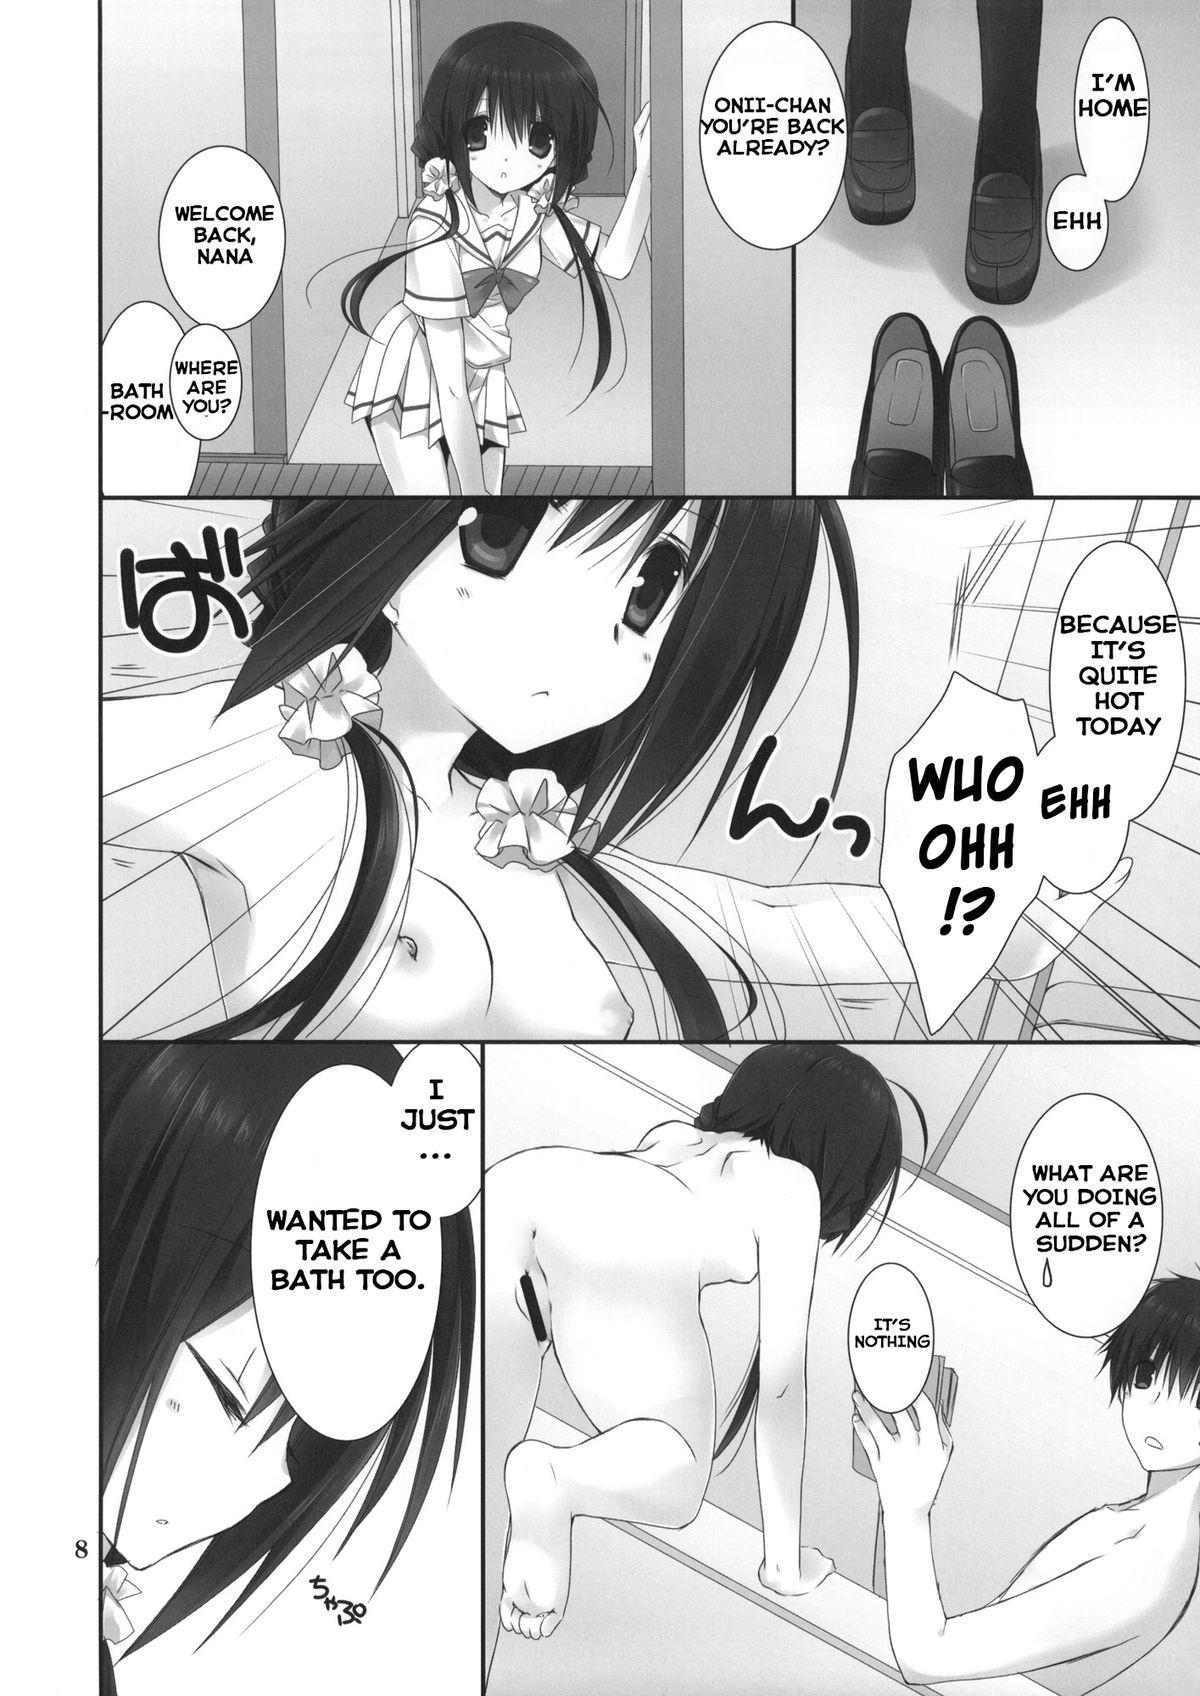 Str8 Imouto no Otetsudai 4 | Little Sister Helper 4 Reversecowgirl - Page 8